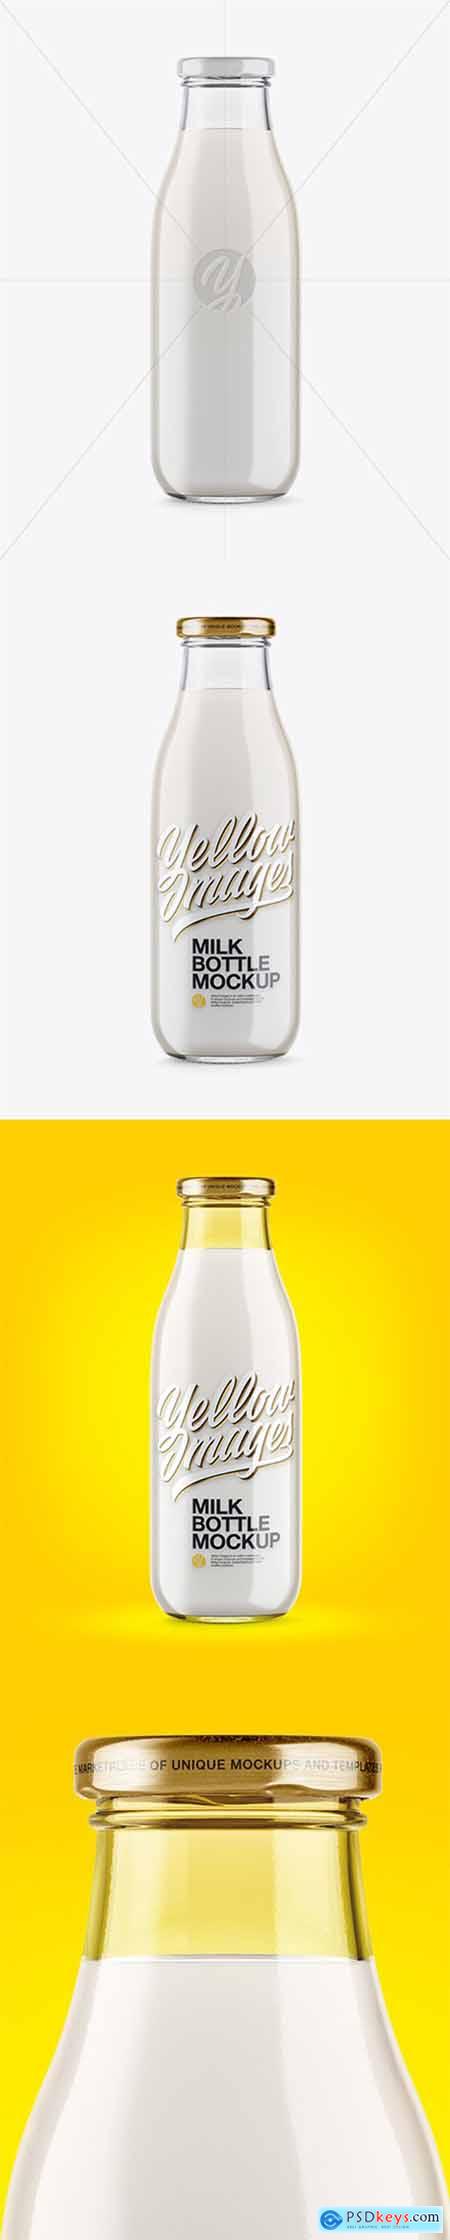 500ml Clear Glass Bottle With Milk Mockup 24767